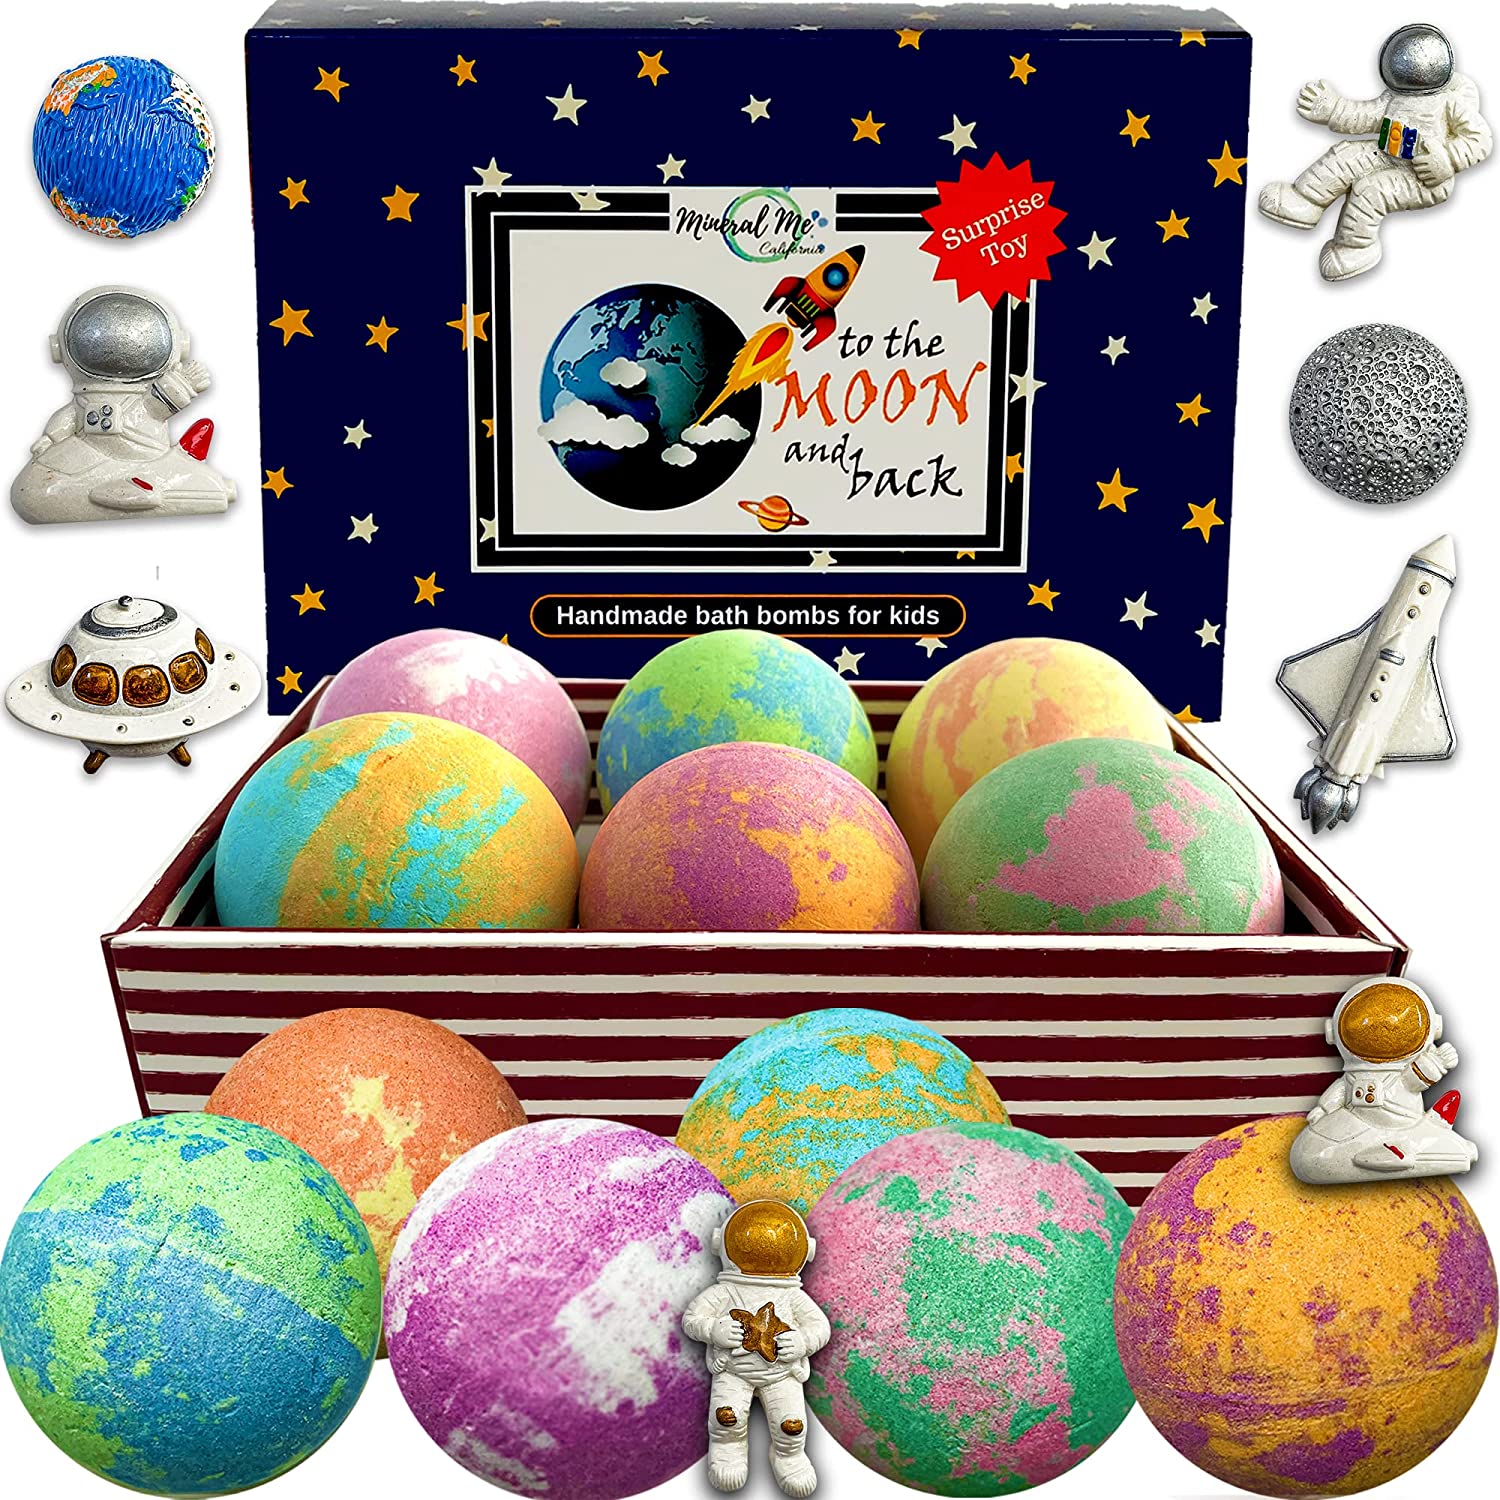 Galaxy Bath Bombs For Kids With Toys Inside